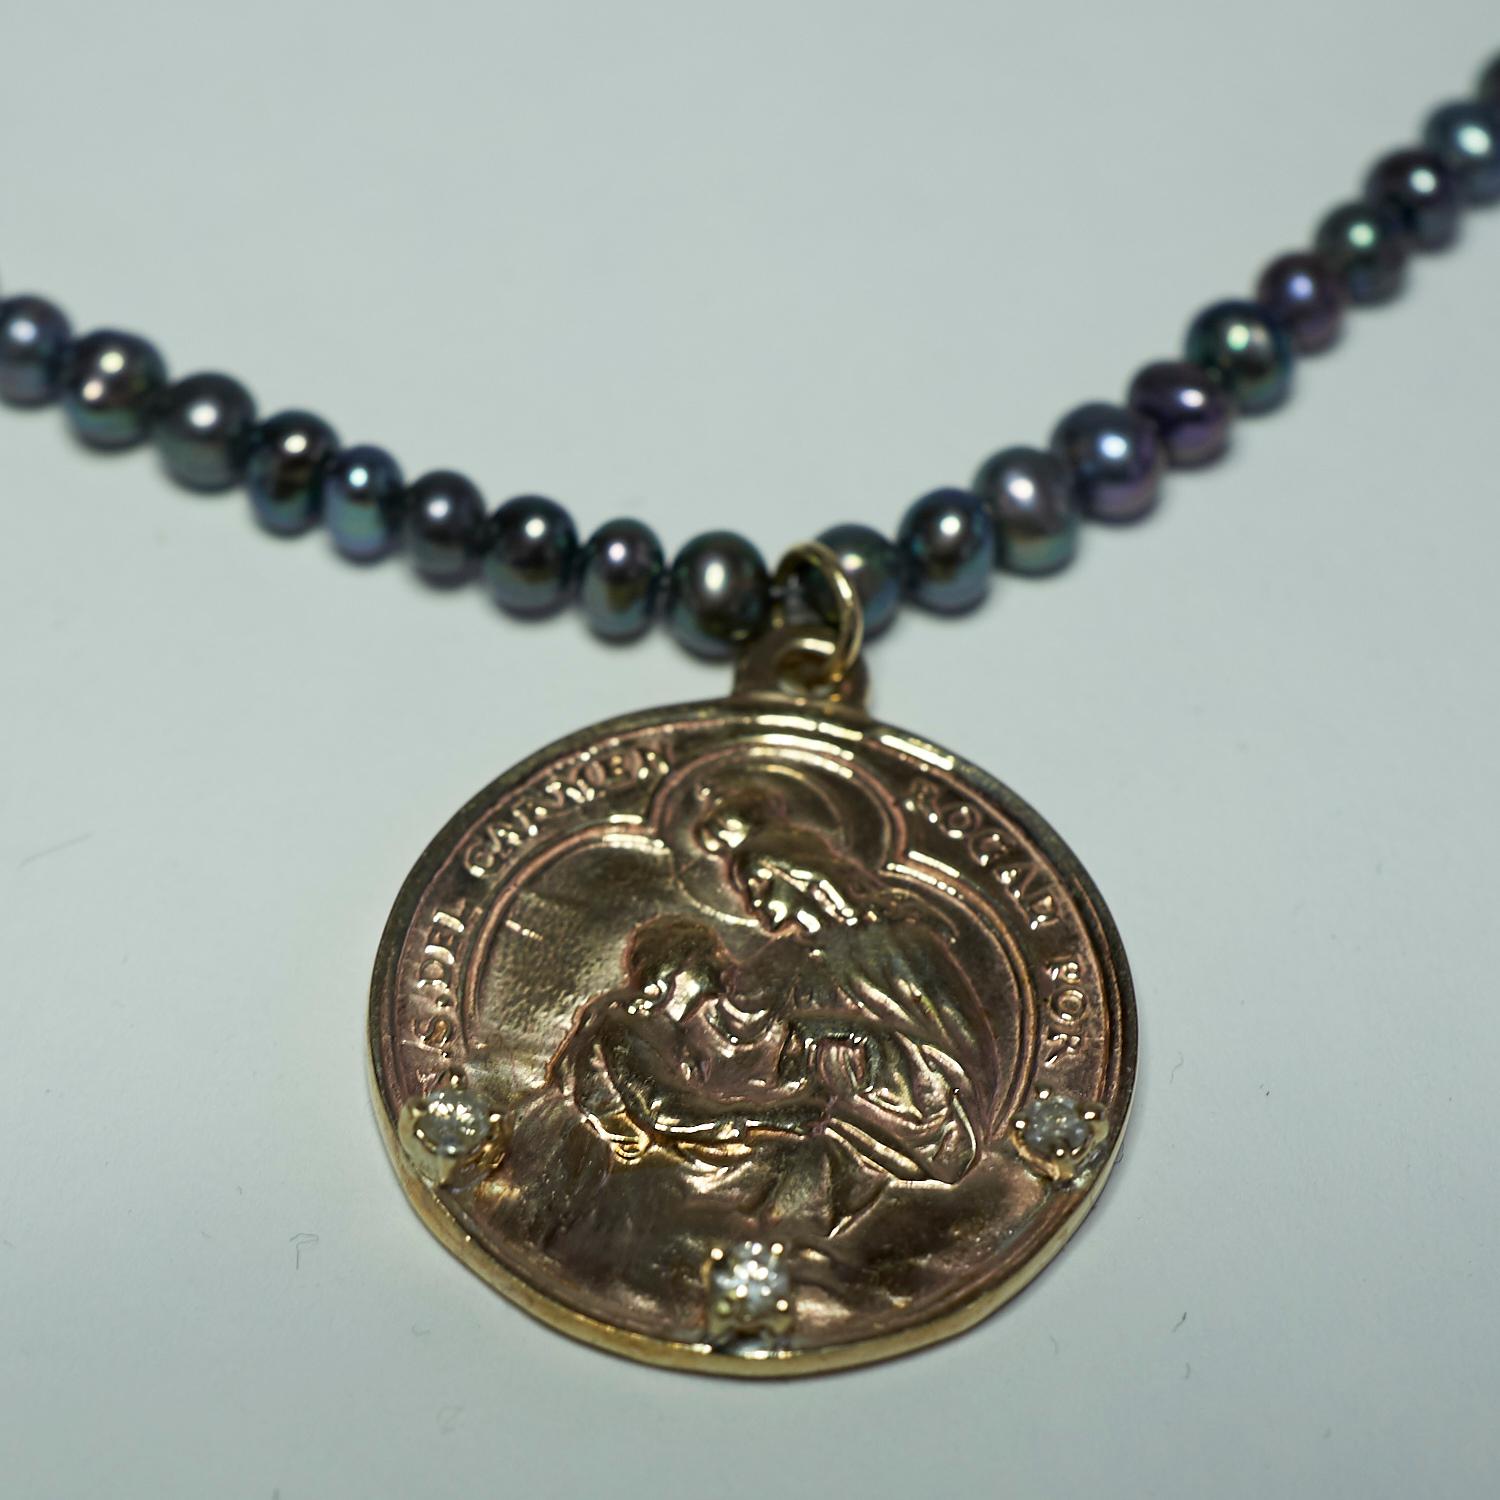 Diamond Virgin Mary Medal Necklace Choker Black Pearl Bead Chain J Dauphin In New Condition For Sale In Los Angeles, CA